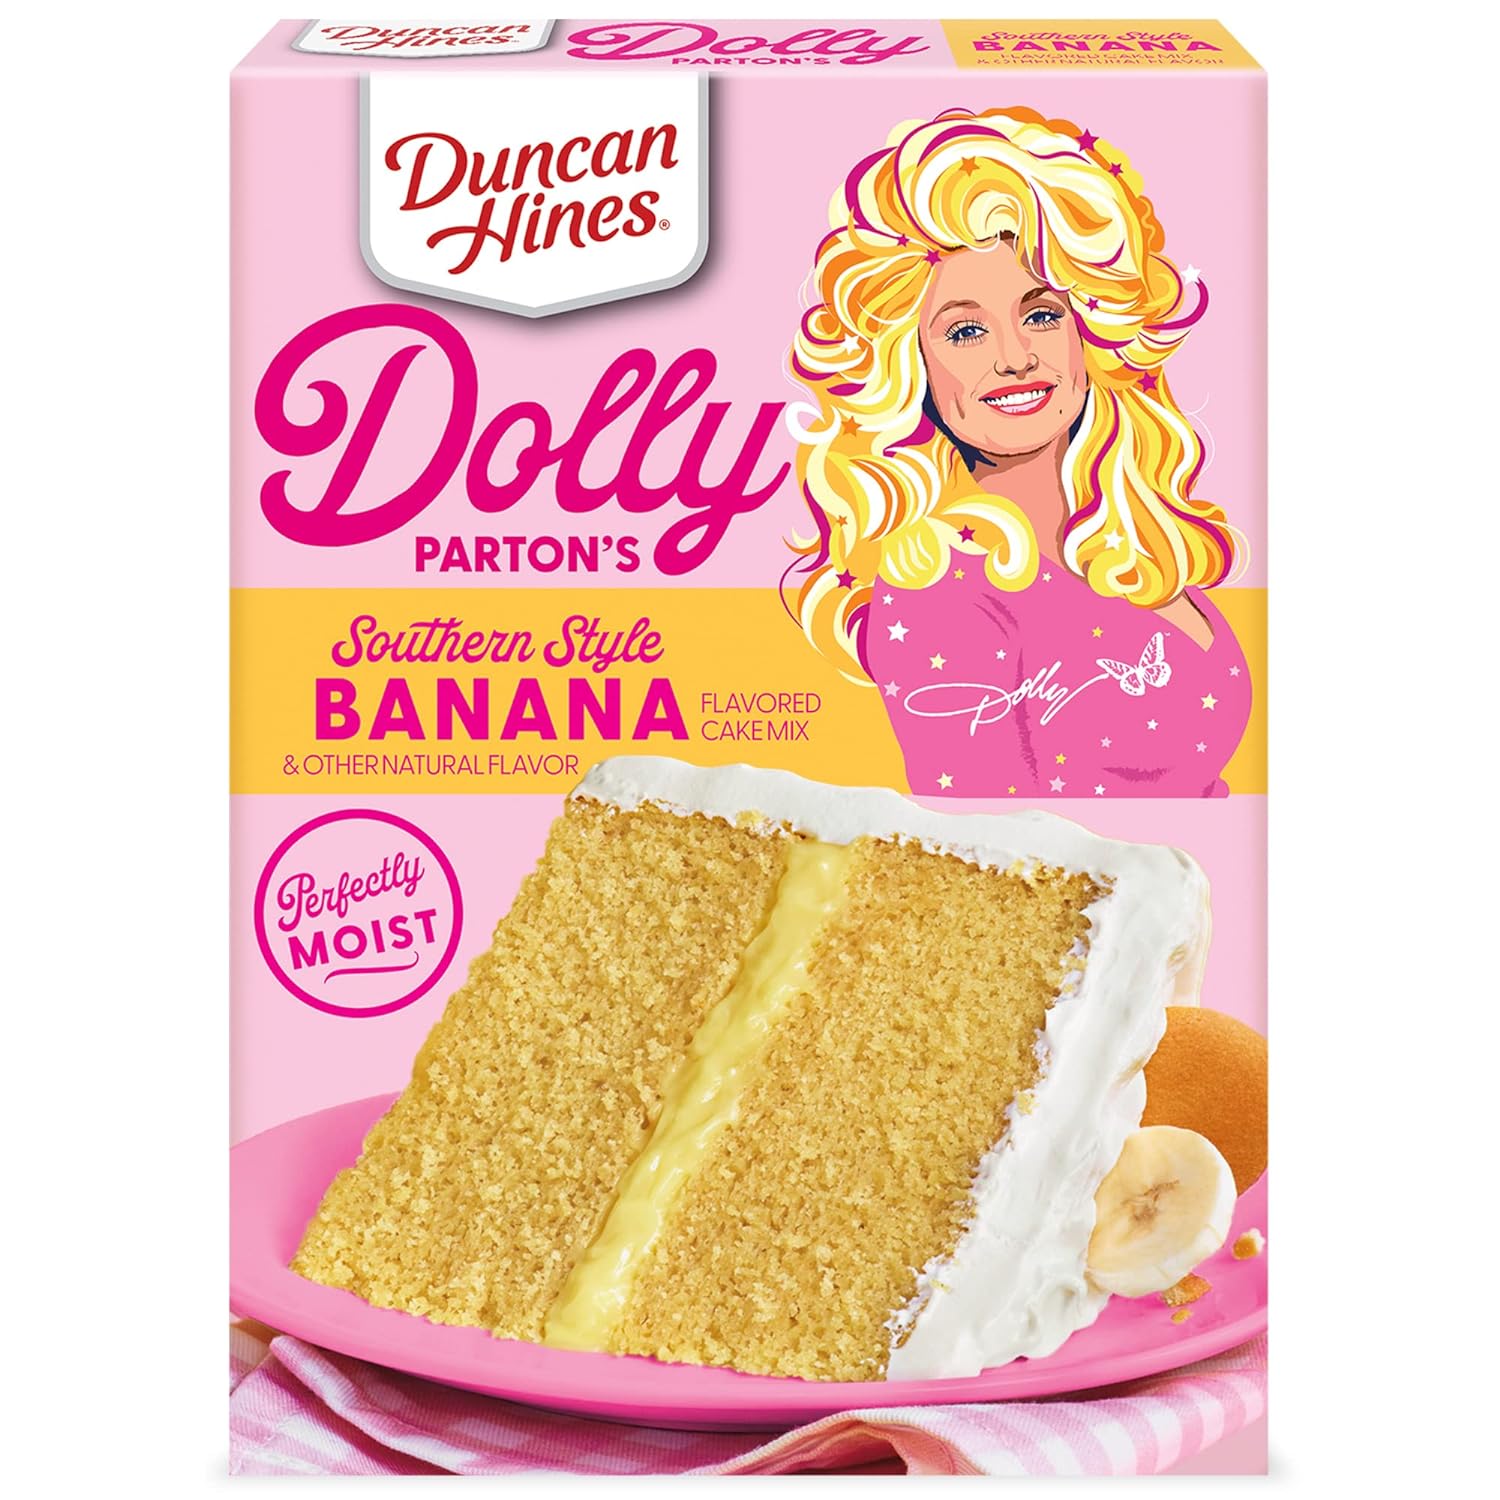 Duncan Hines Dolly Parton's Favorite Southern-Style Banana Flavored Cake Mix, 15.25 oz